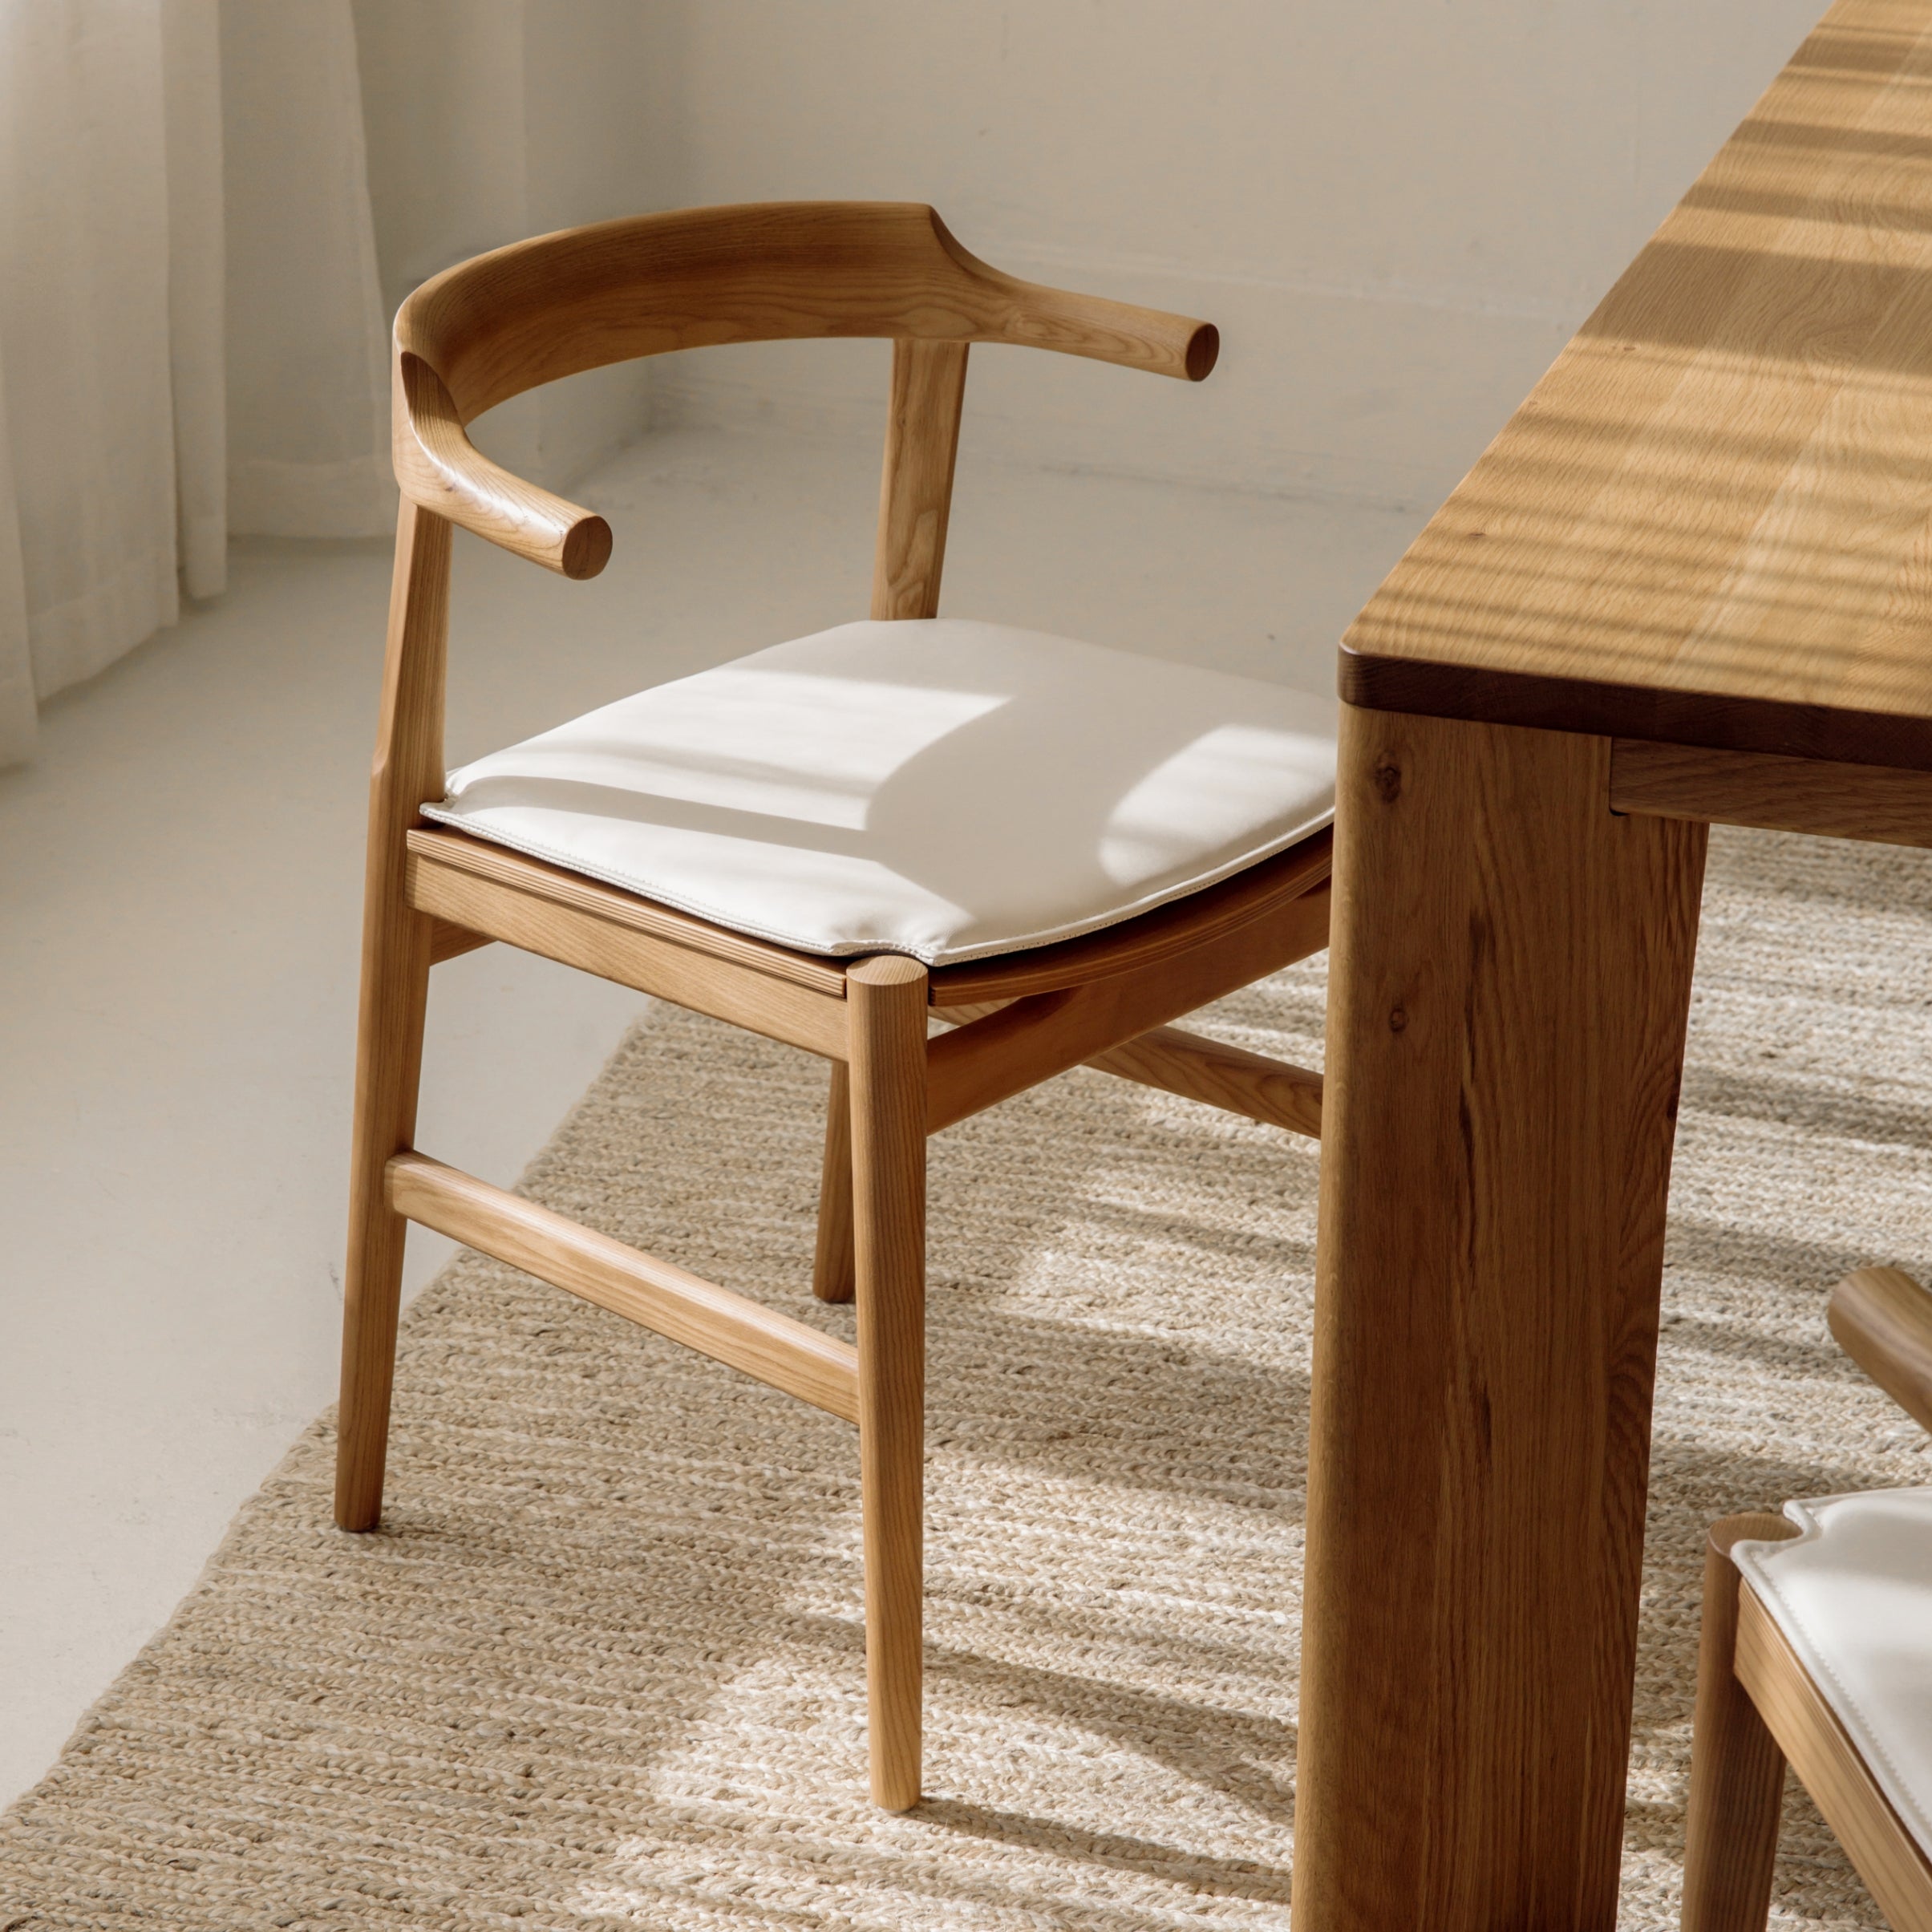 Tuck In Dining Chair with Cushion, White Oak, Wood Seat with White Cushion - Image 9